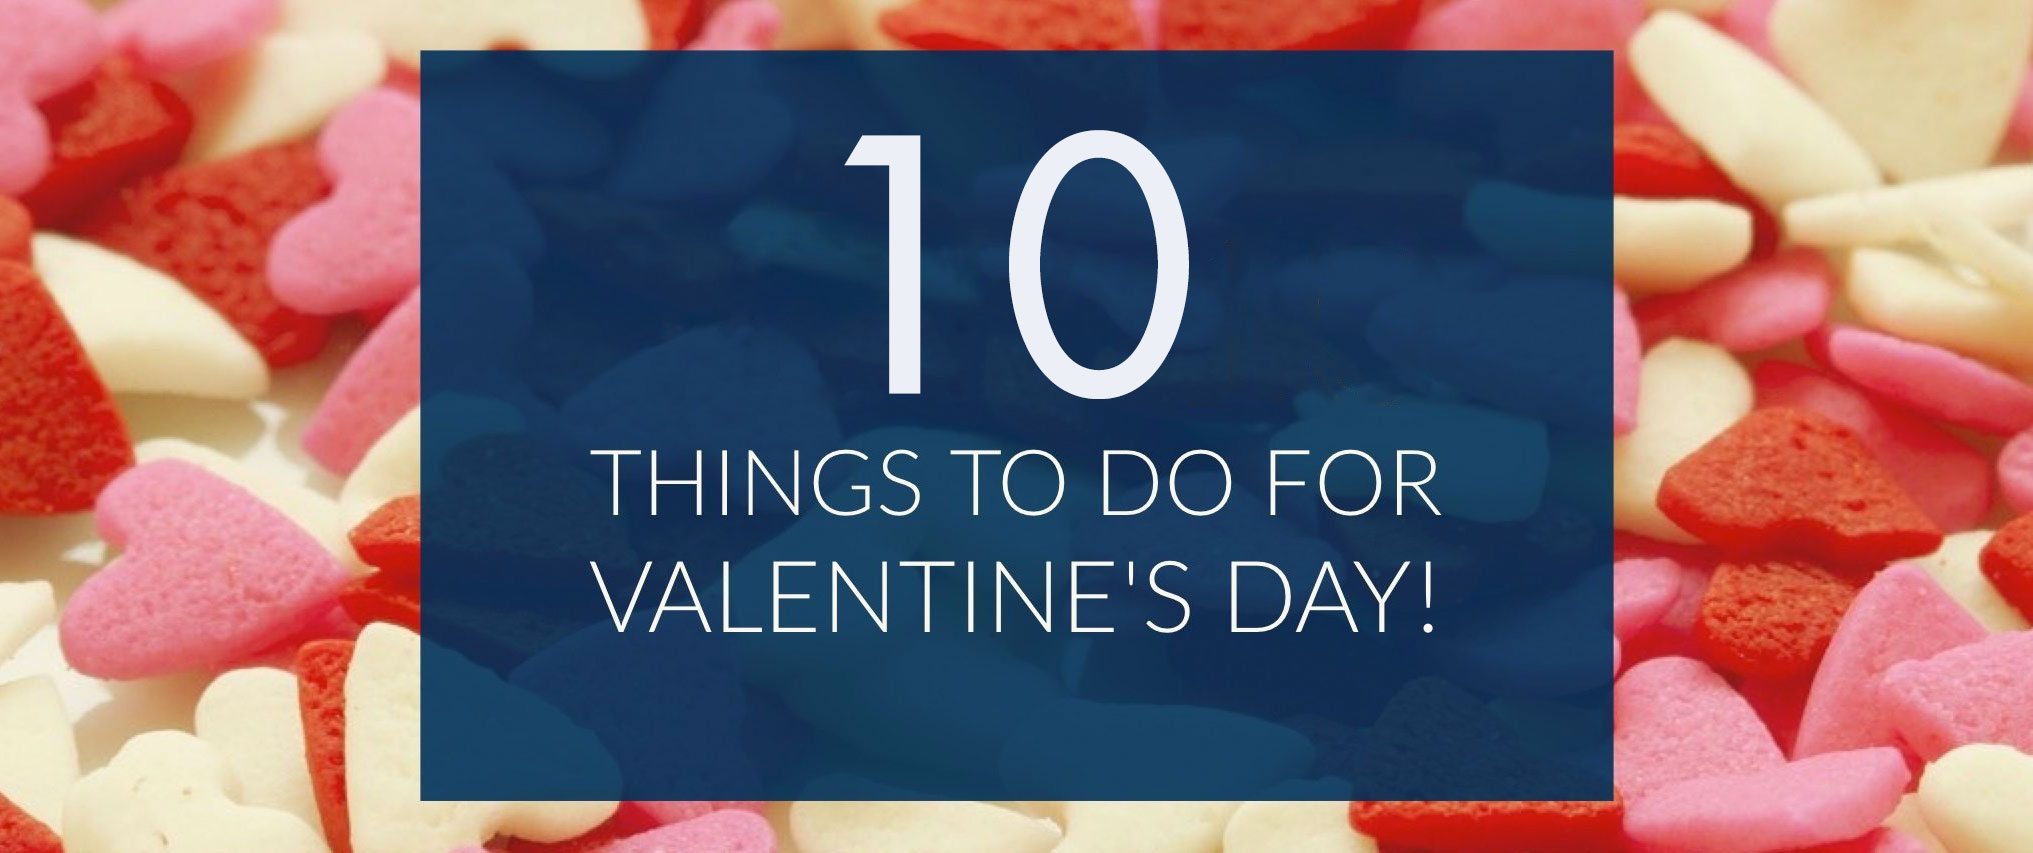 10 Things To Do For Valentine’s Day